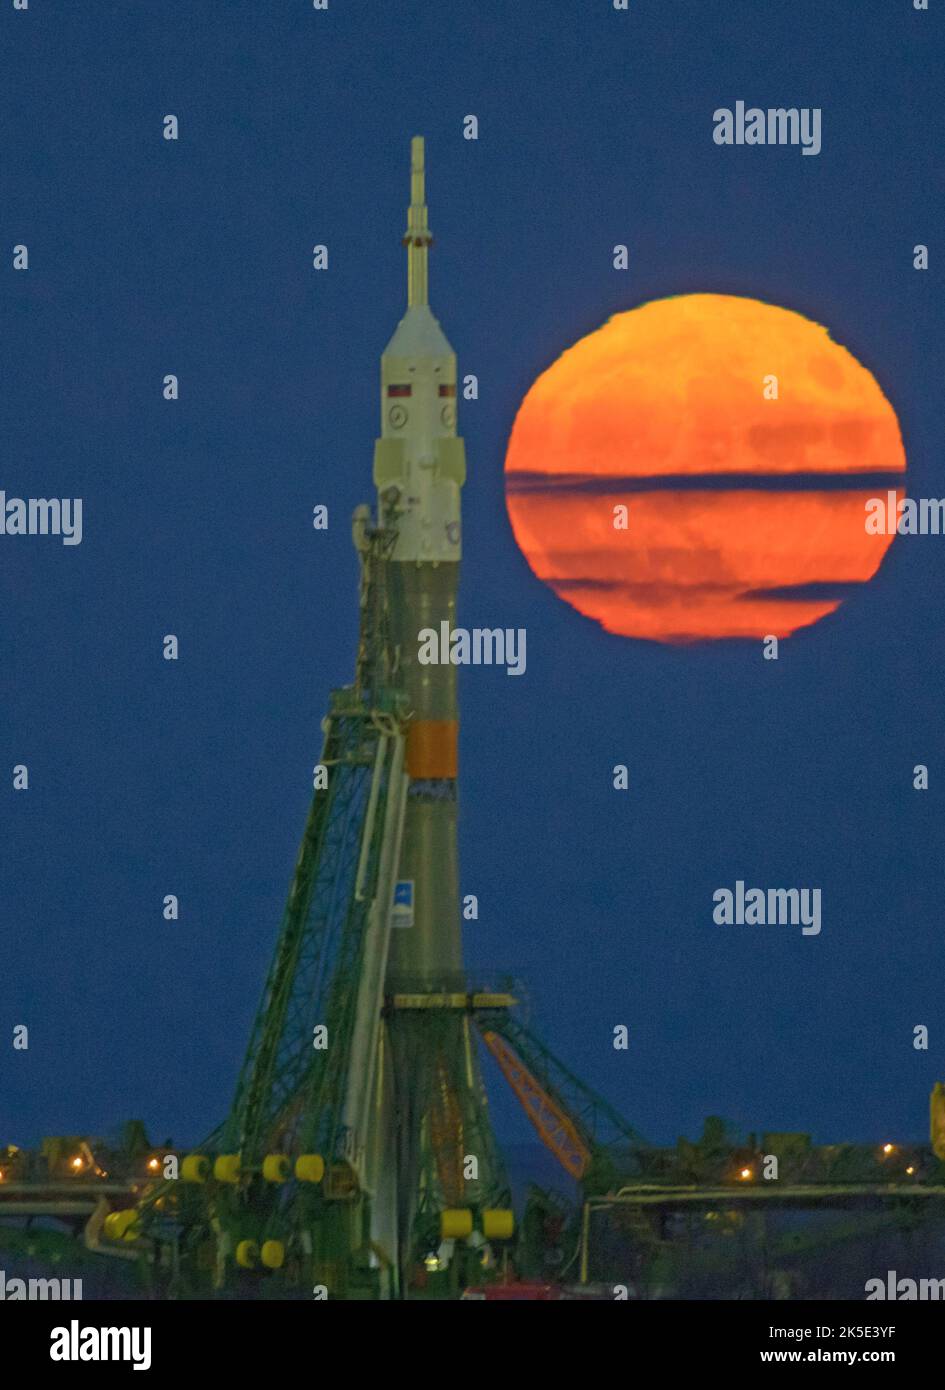 The Moon, a supermoon, rising behind the Soyuz rocket at the Baikonur Cosmodrome launch pad in Kazakhstan, November 14, 2016. NASA astronaut Peggy Whitson, Russian cosmonaut Oleg Novitskiy of Roscosmos, and ESA astronaut Thomas Pesquet will launch from the Baikonur Cosmodrome in Kazakhstan the morning of November 18 (Kazakh time.) All three will spend approximately six months on the orbital complex. A supermoon occurs when the moon's orbit is closest (perigee) to Earth. A unique, digitally optimised version of a NASA image by senior NASA photographer Bill Ingalls / credit NASA Stock Photo